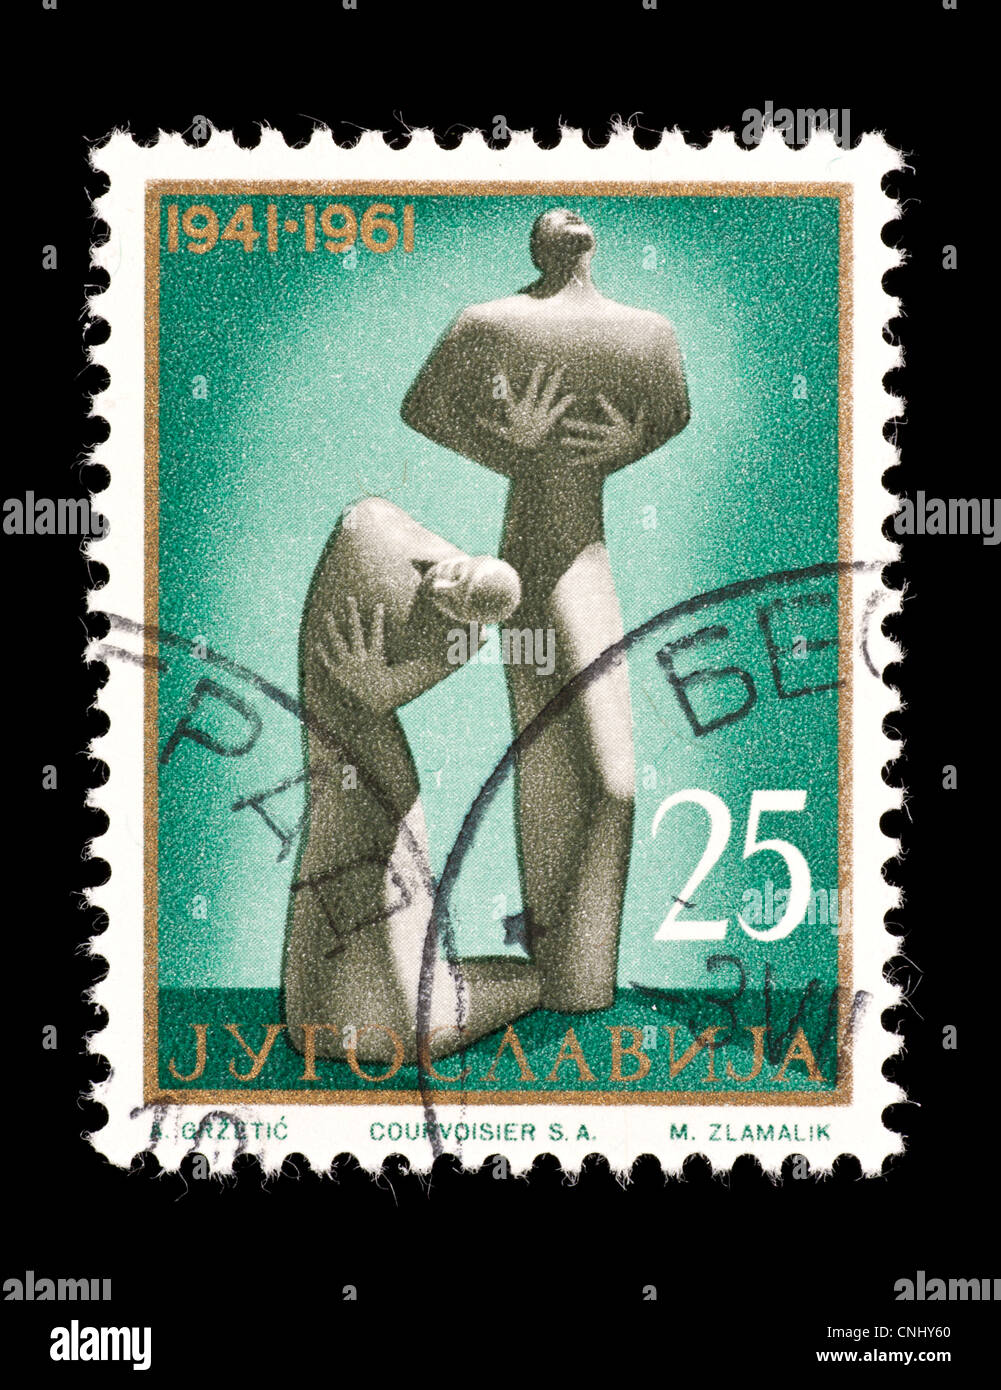 Postage stamp from the former Yugoslavia depicting the victim's monument in Kragijevac. Stock Photo